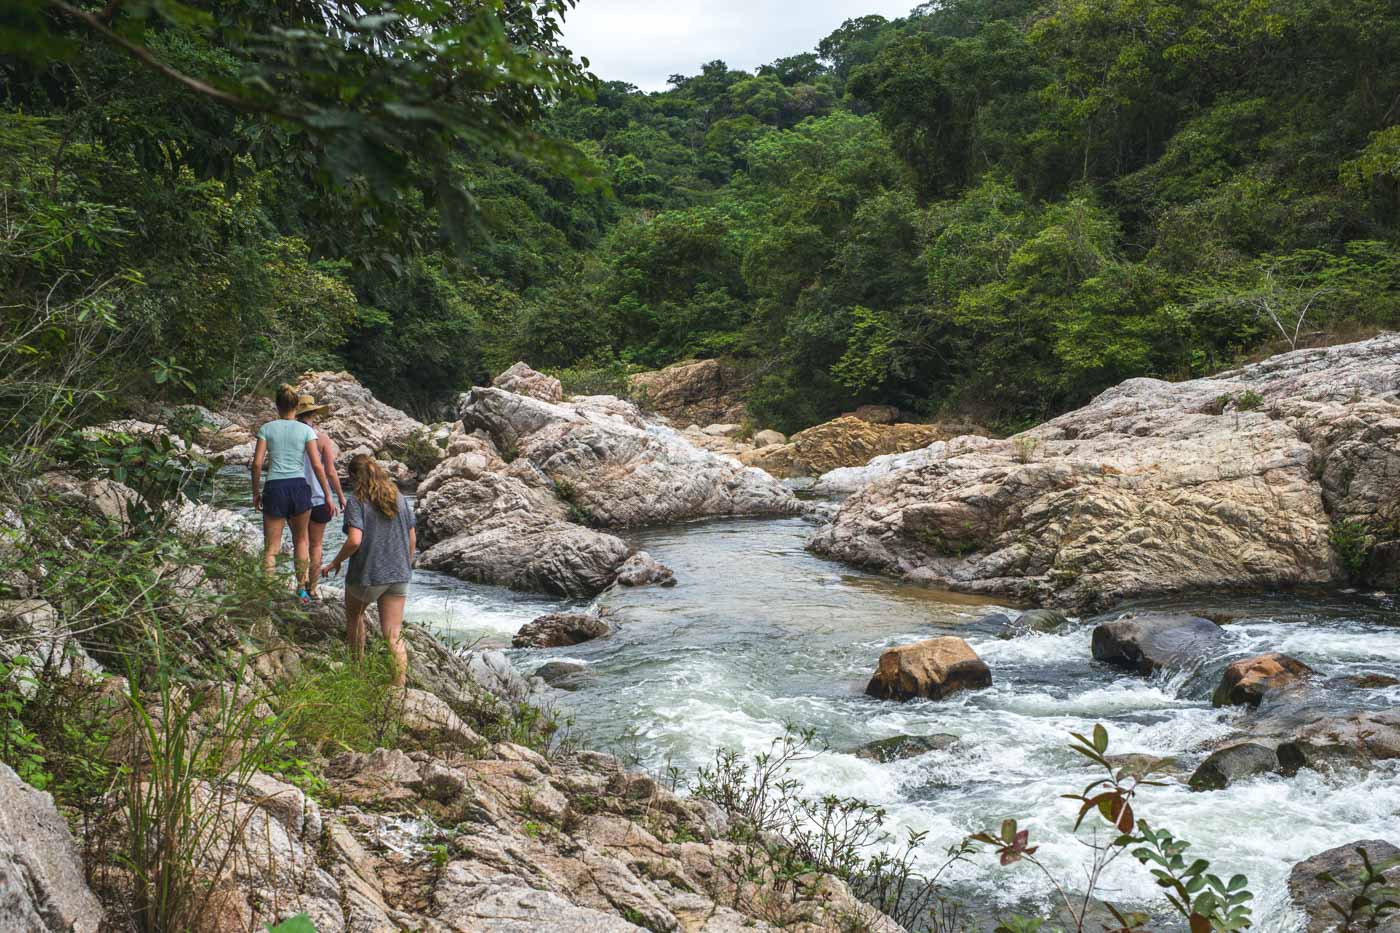 Tourists hiking alongside the river that leads to Yelapa Waterfall 2 in the forest.